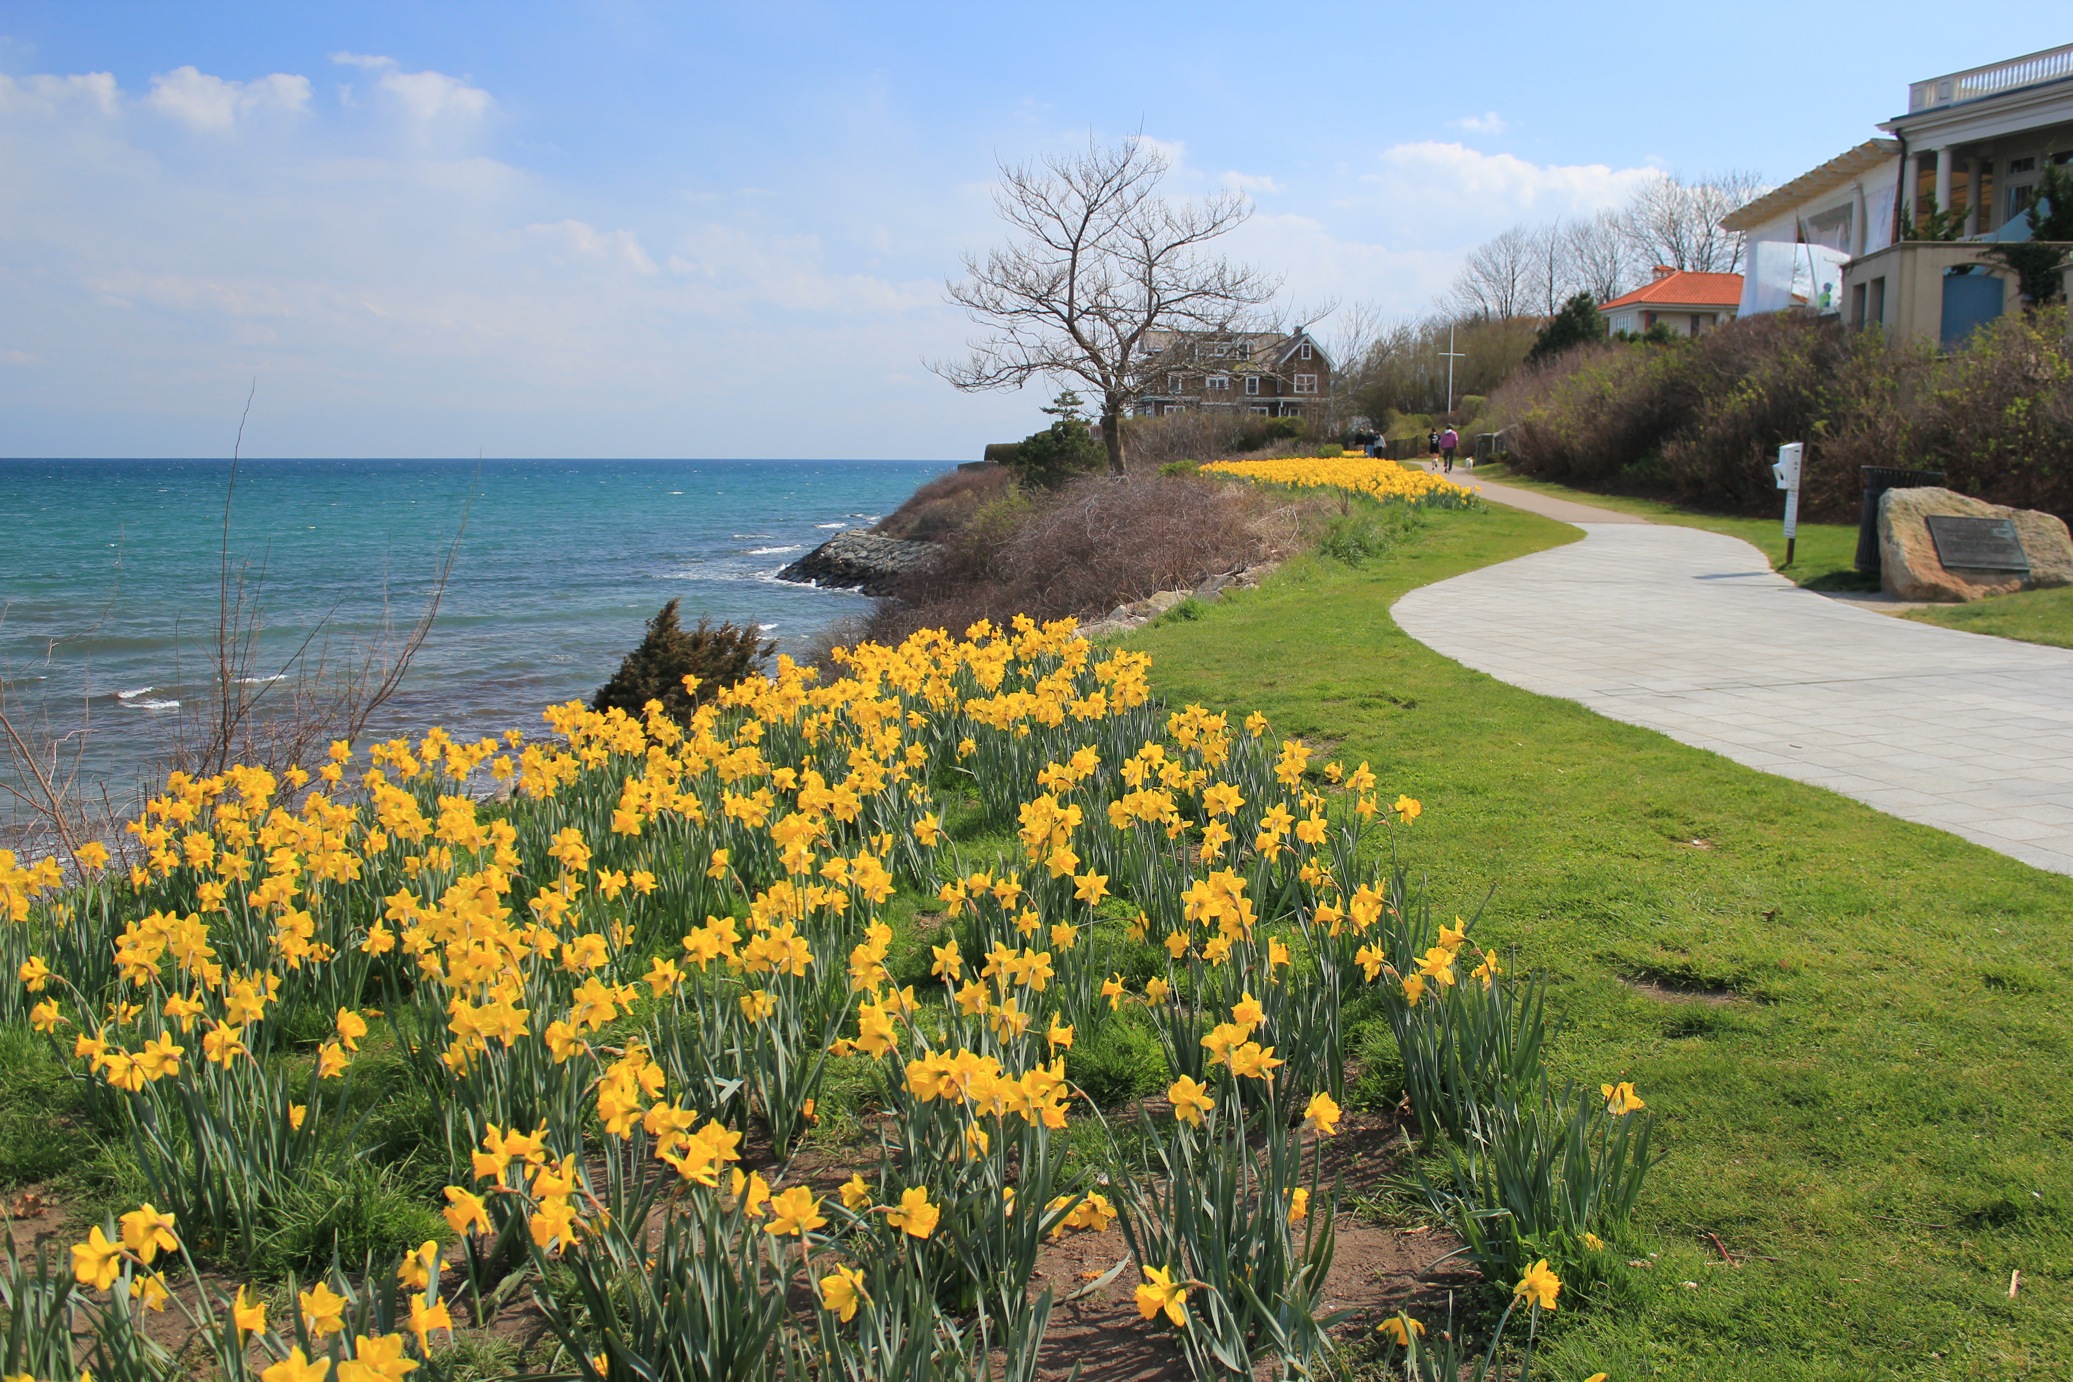 Daffodils On The Cliff (user submitted)